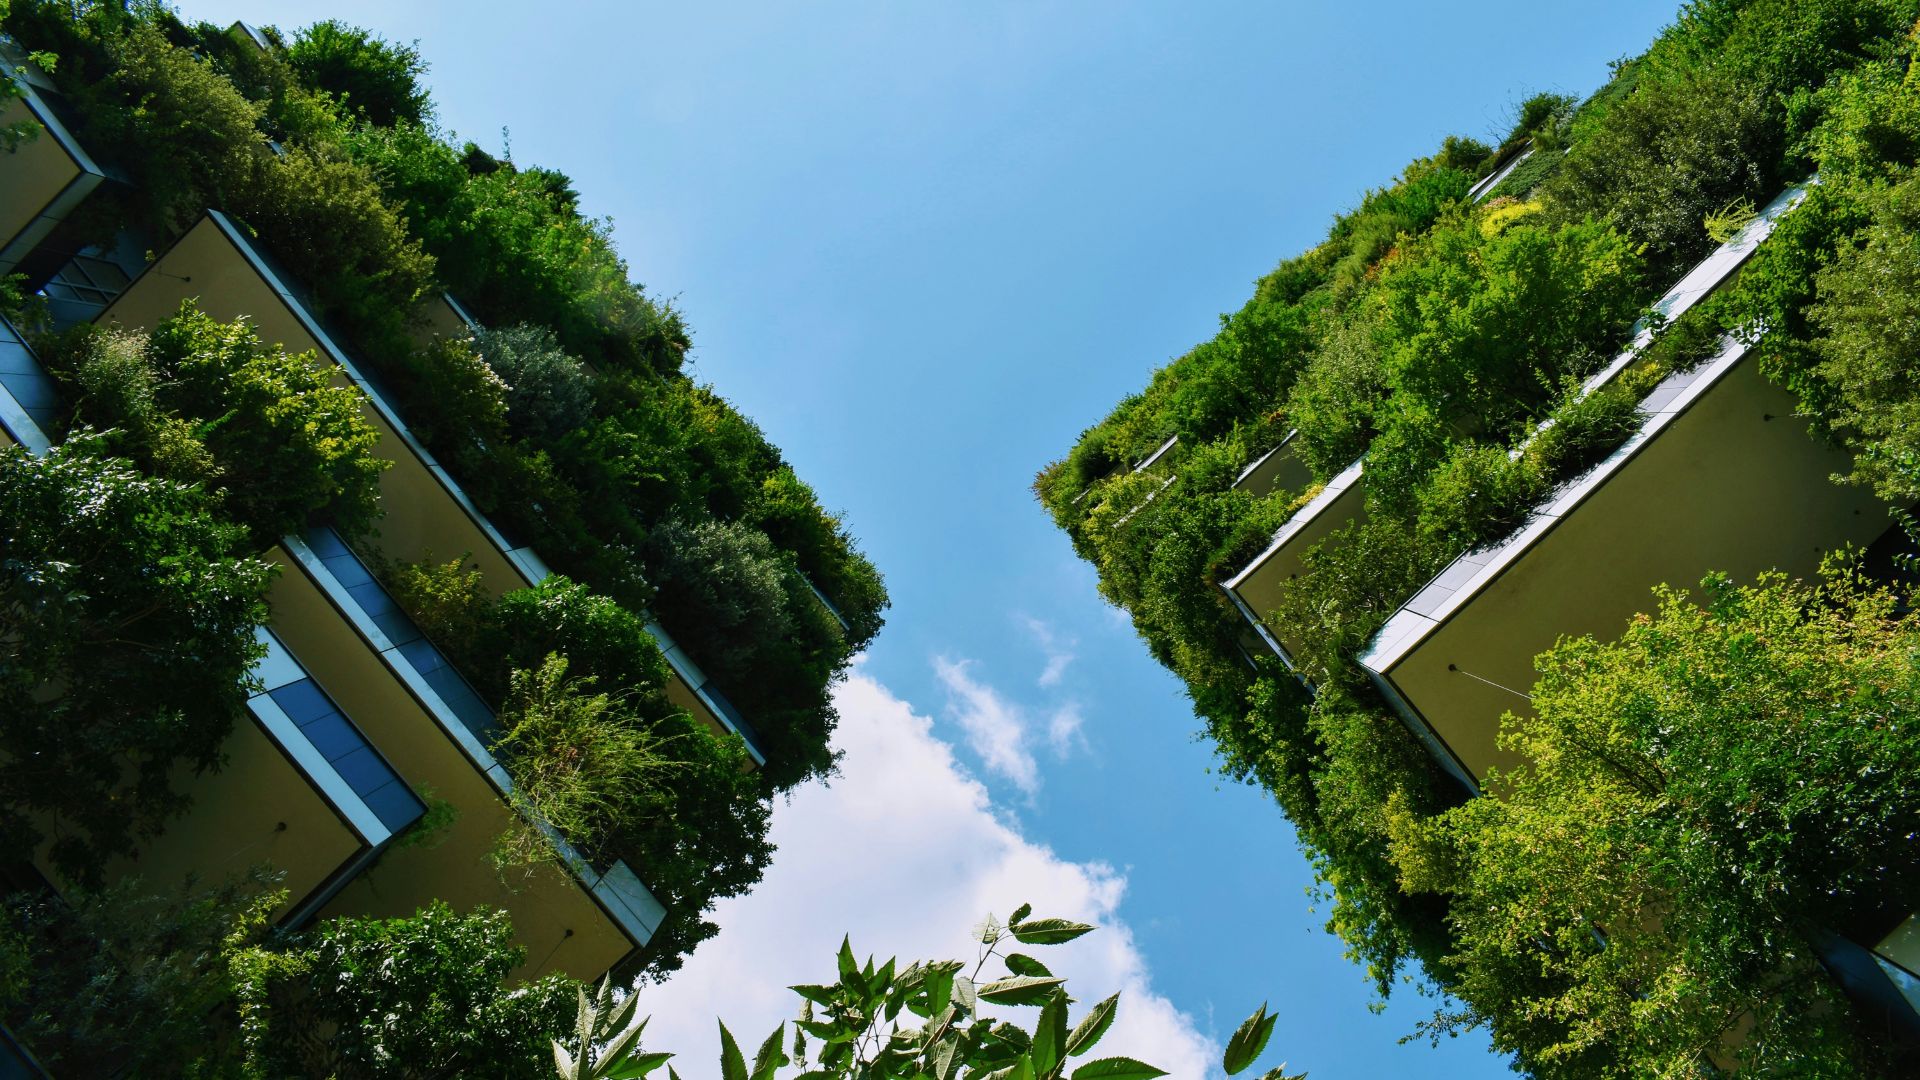 Have you ever seen a Vertical Forest? Discover the Bosco Verticale in Milan!